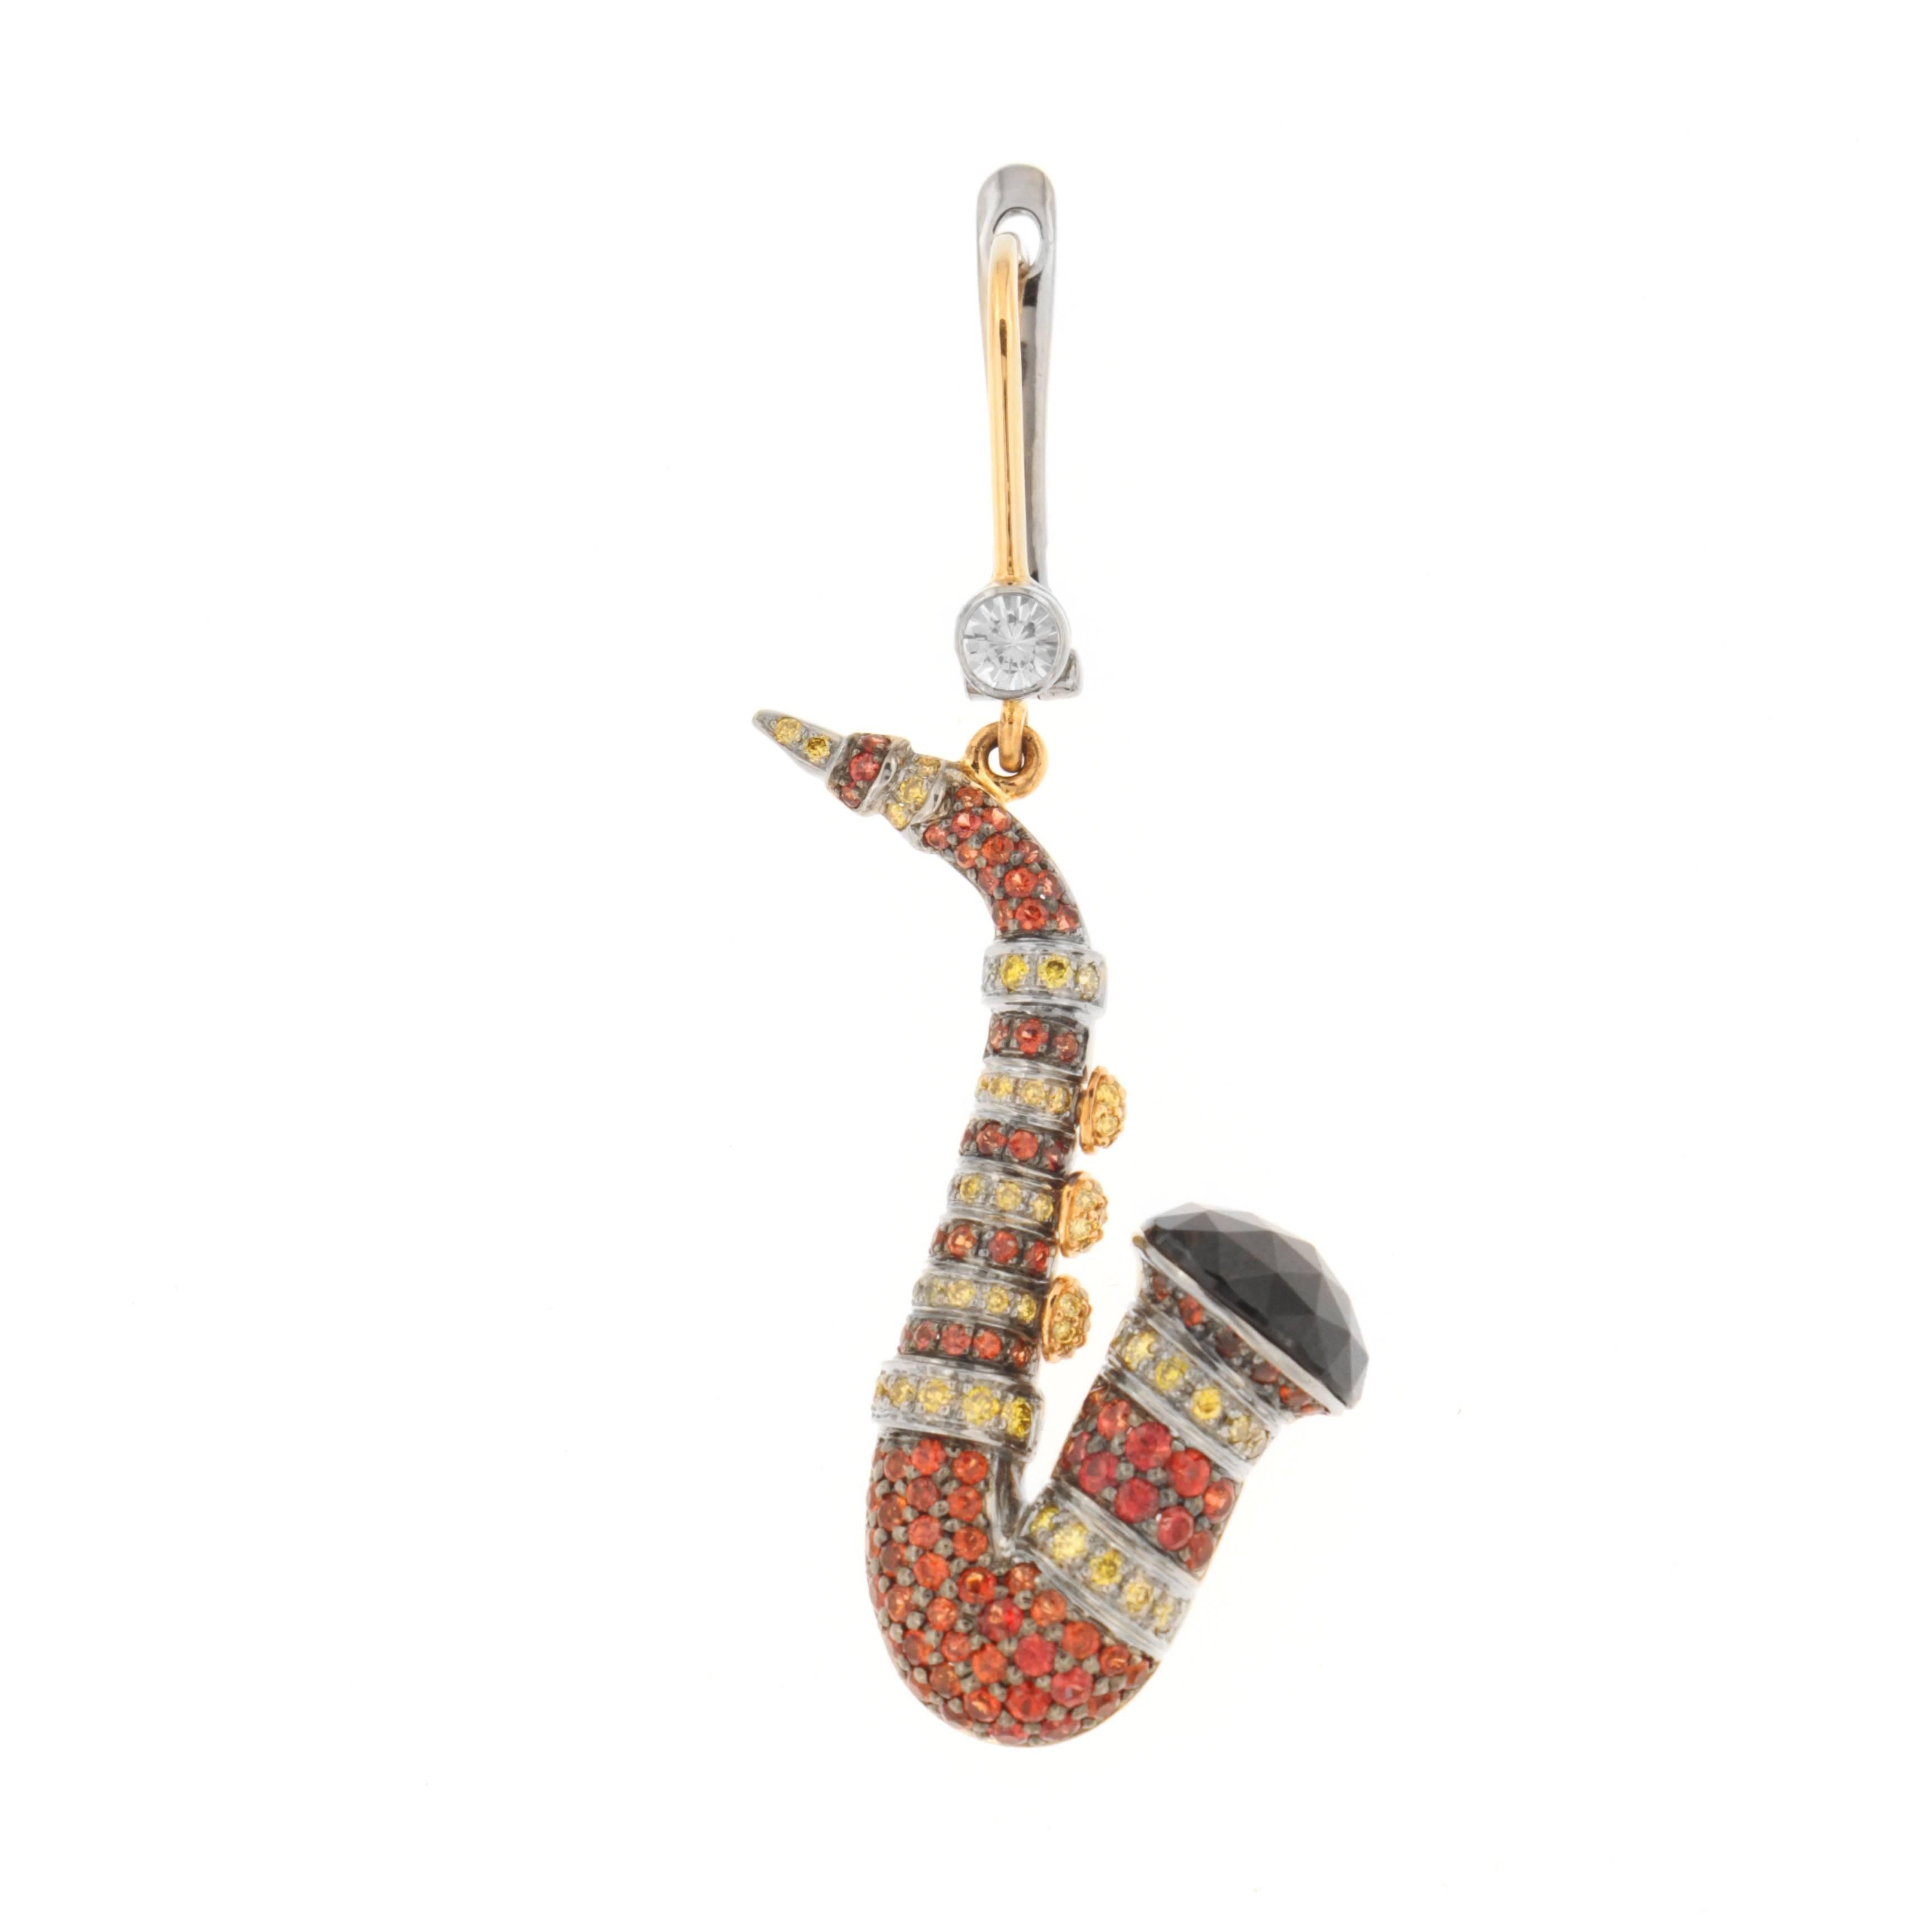 Jazz up your style with Zorab's replica of one of the most iconic instruments - the saxophone! Made from 10.61 Carats of Spinel, 2.80 Carats of Orange and Red Sapphires, 0.83 Carats of Yellow Diamonds and 0.47 Carats of White Diamonds, Zorab's